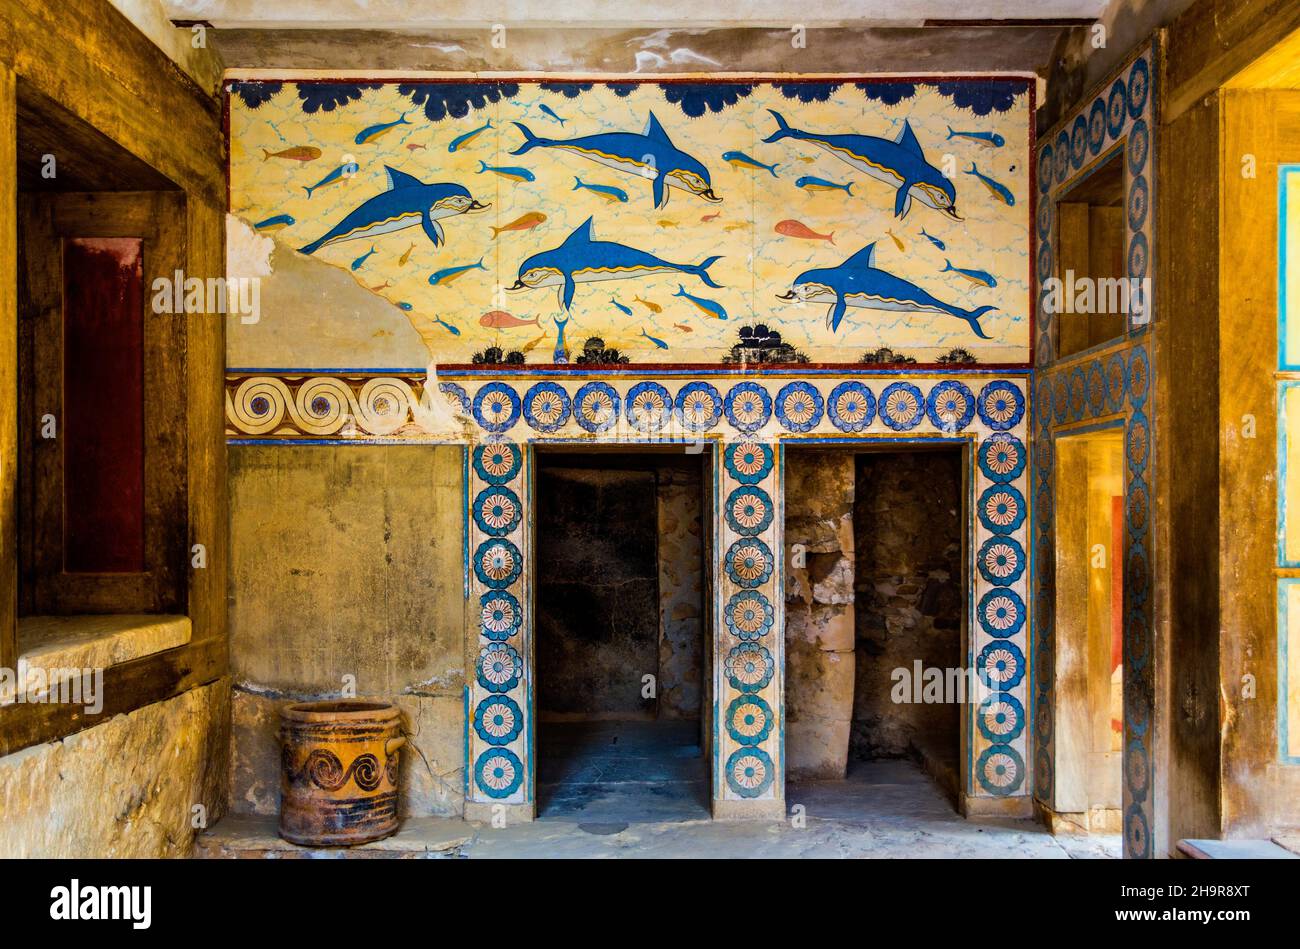 Dolphin frescoes (replica) in the Queen's bath (1600-1400 BC), Minoan Palace of Knossos by King Minos, built between 2100 and 1800 BC, Crete Stock Photo